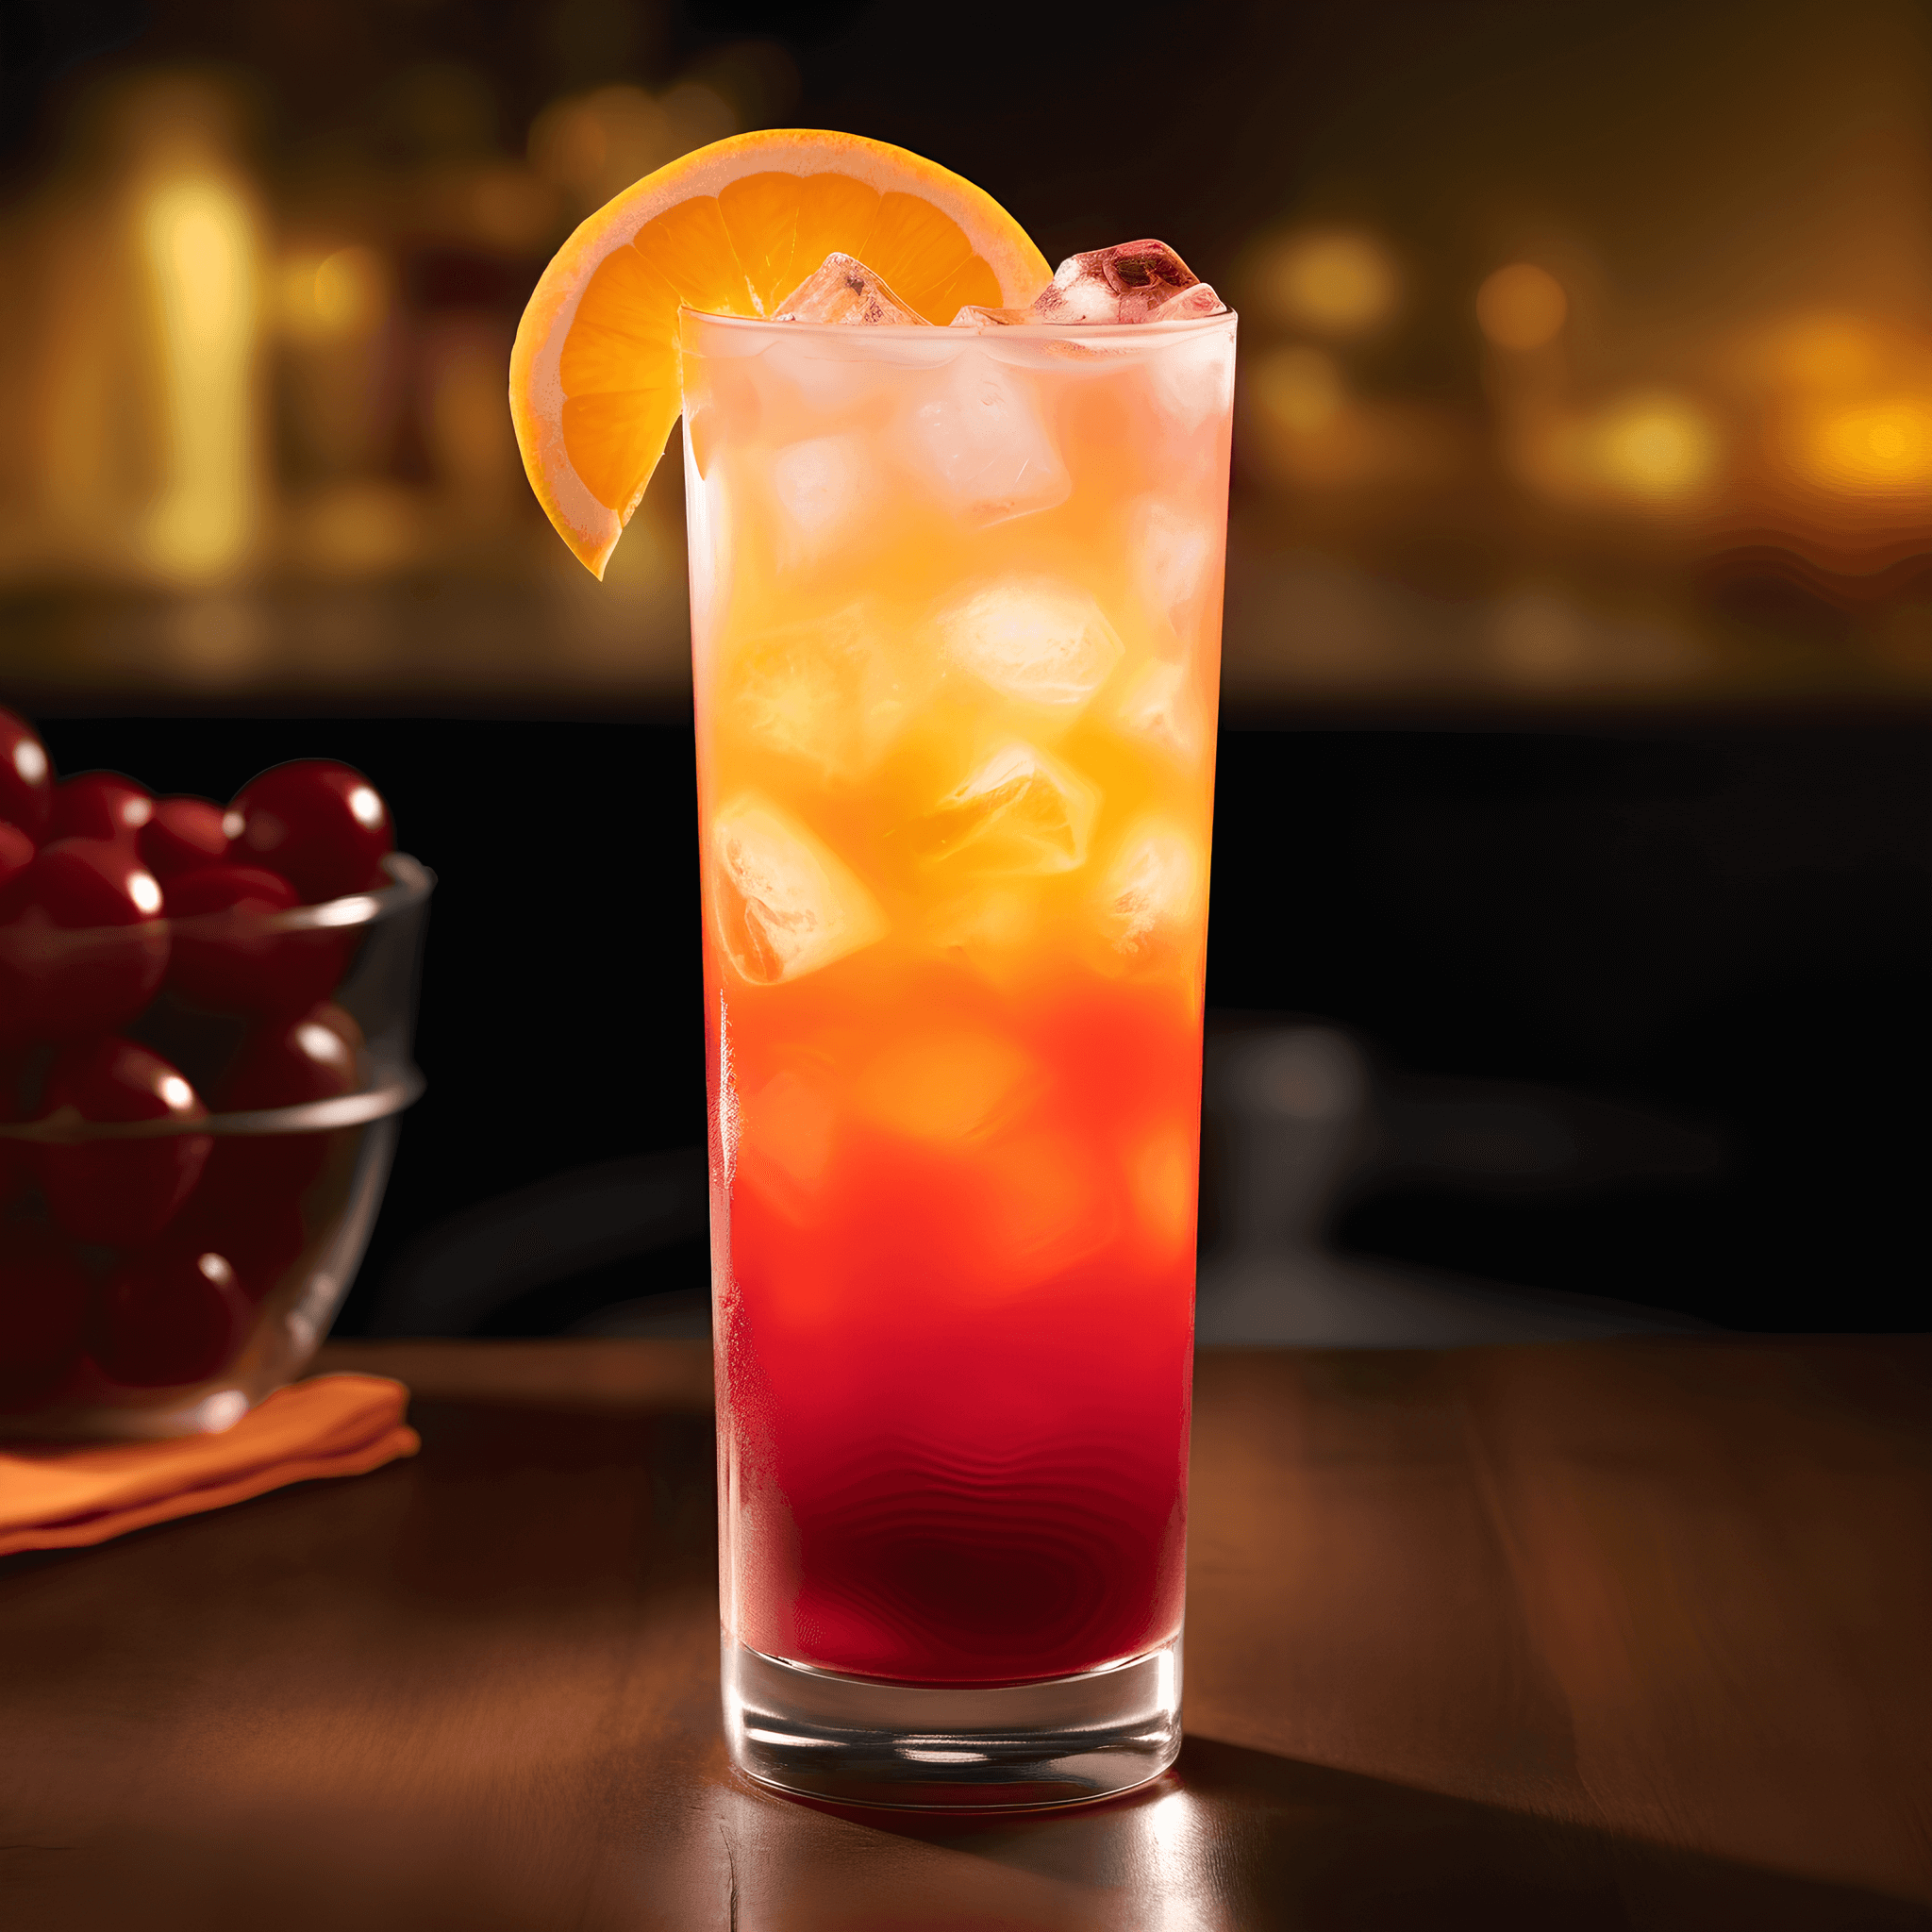 The Tequila Sunrise has a sweet and fruity taste, with a hint of sourness from the orange juice and grenadine. The tequila adds a subtle warmth and depth to the flavor, making it a well-balanced and satisfying drink.